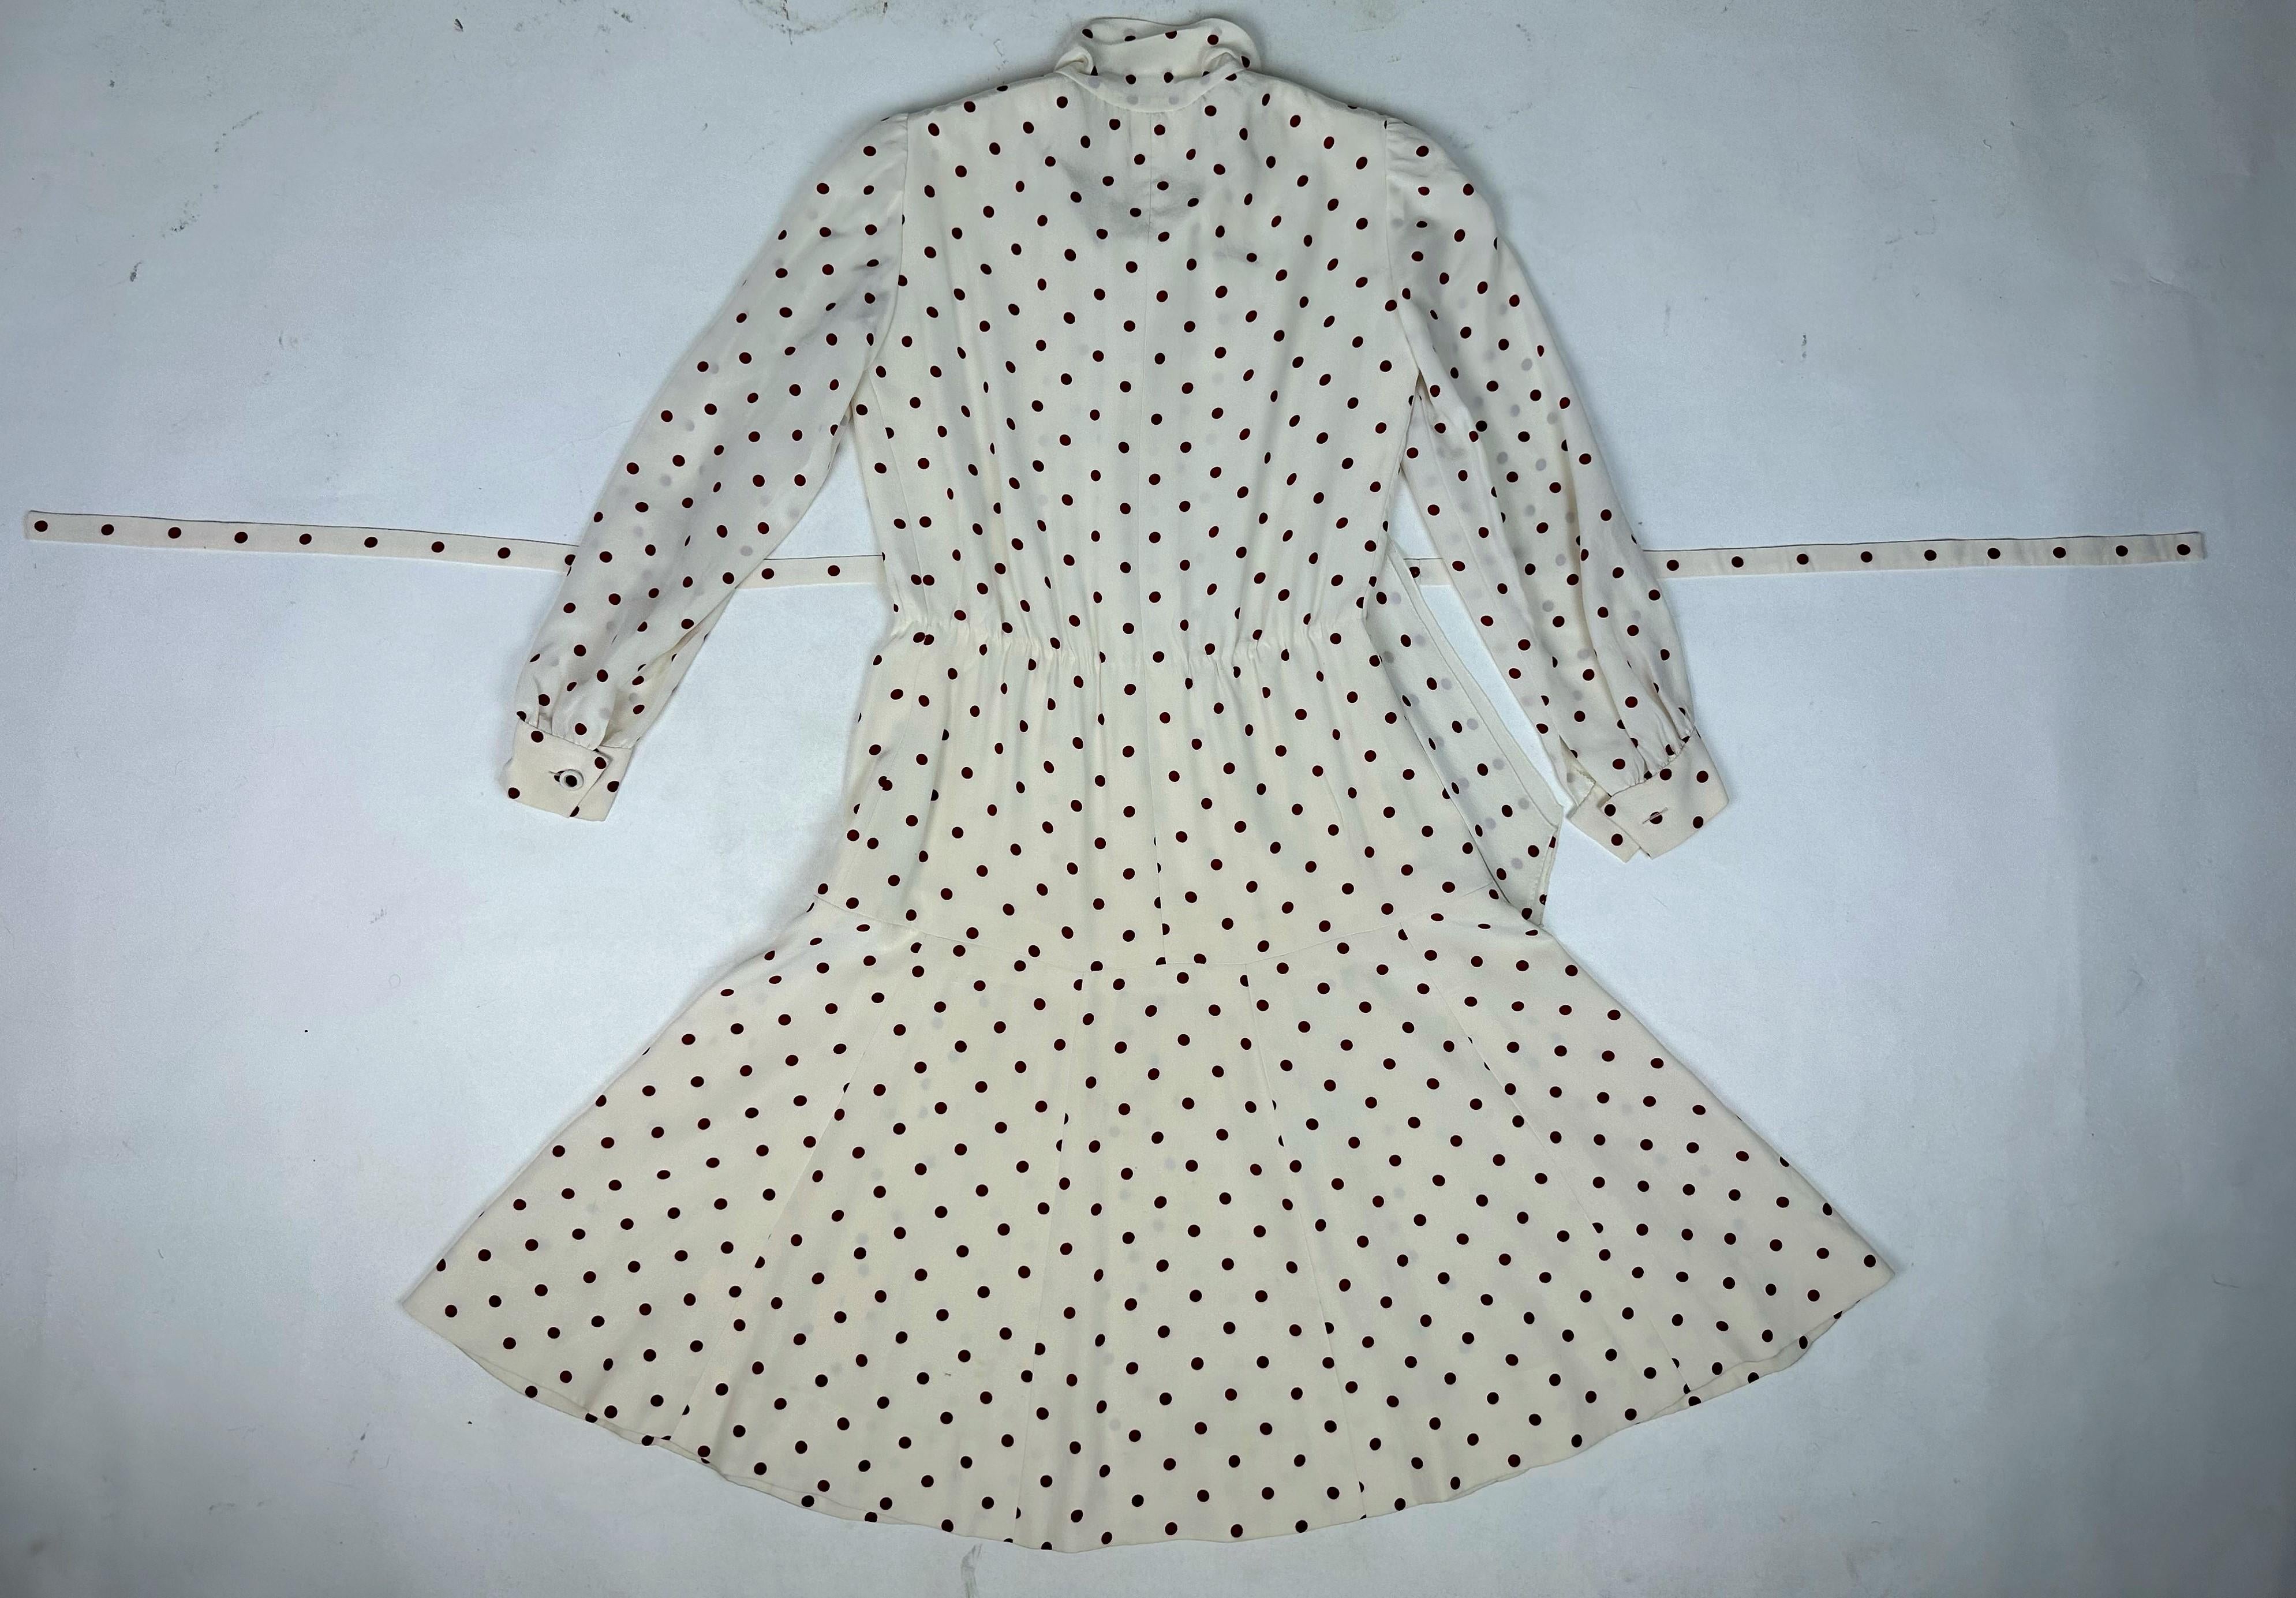 A Polka Dots crepe cocktail dress by Chanel Haute Couture numbered 59644 C. 1975 For Sale 11